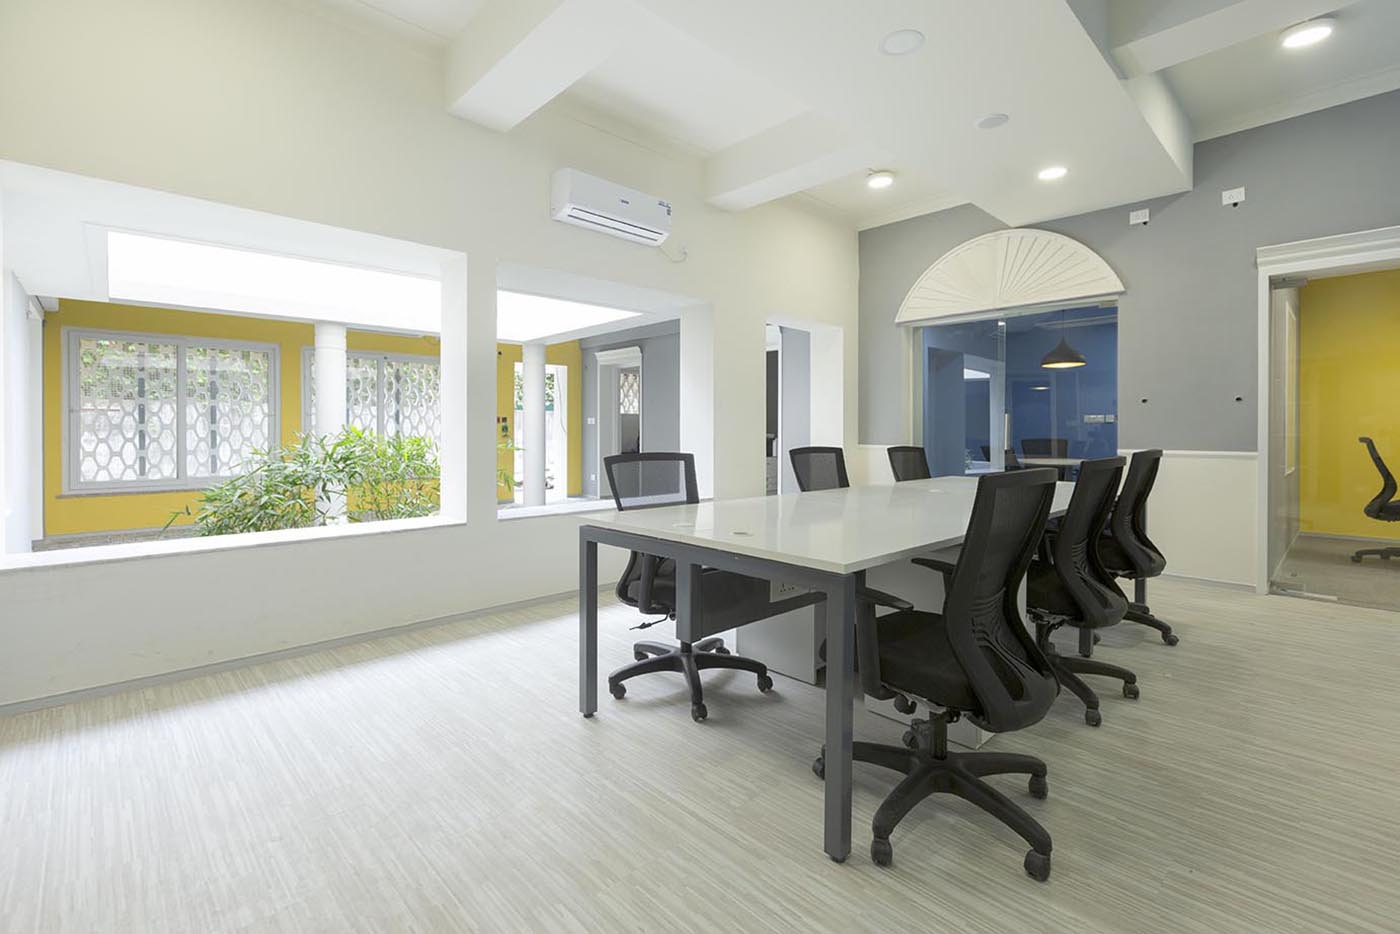 Cove Offices’ shared office spaces for rent in Chennai